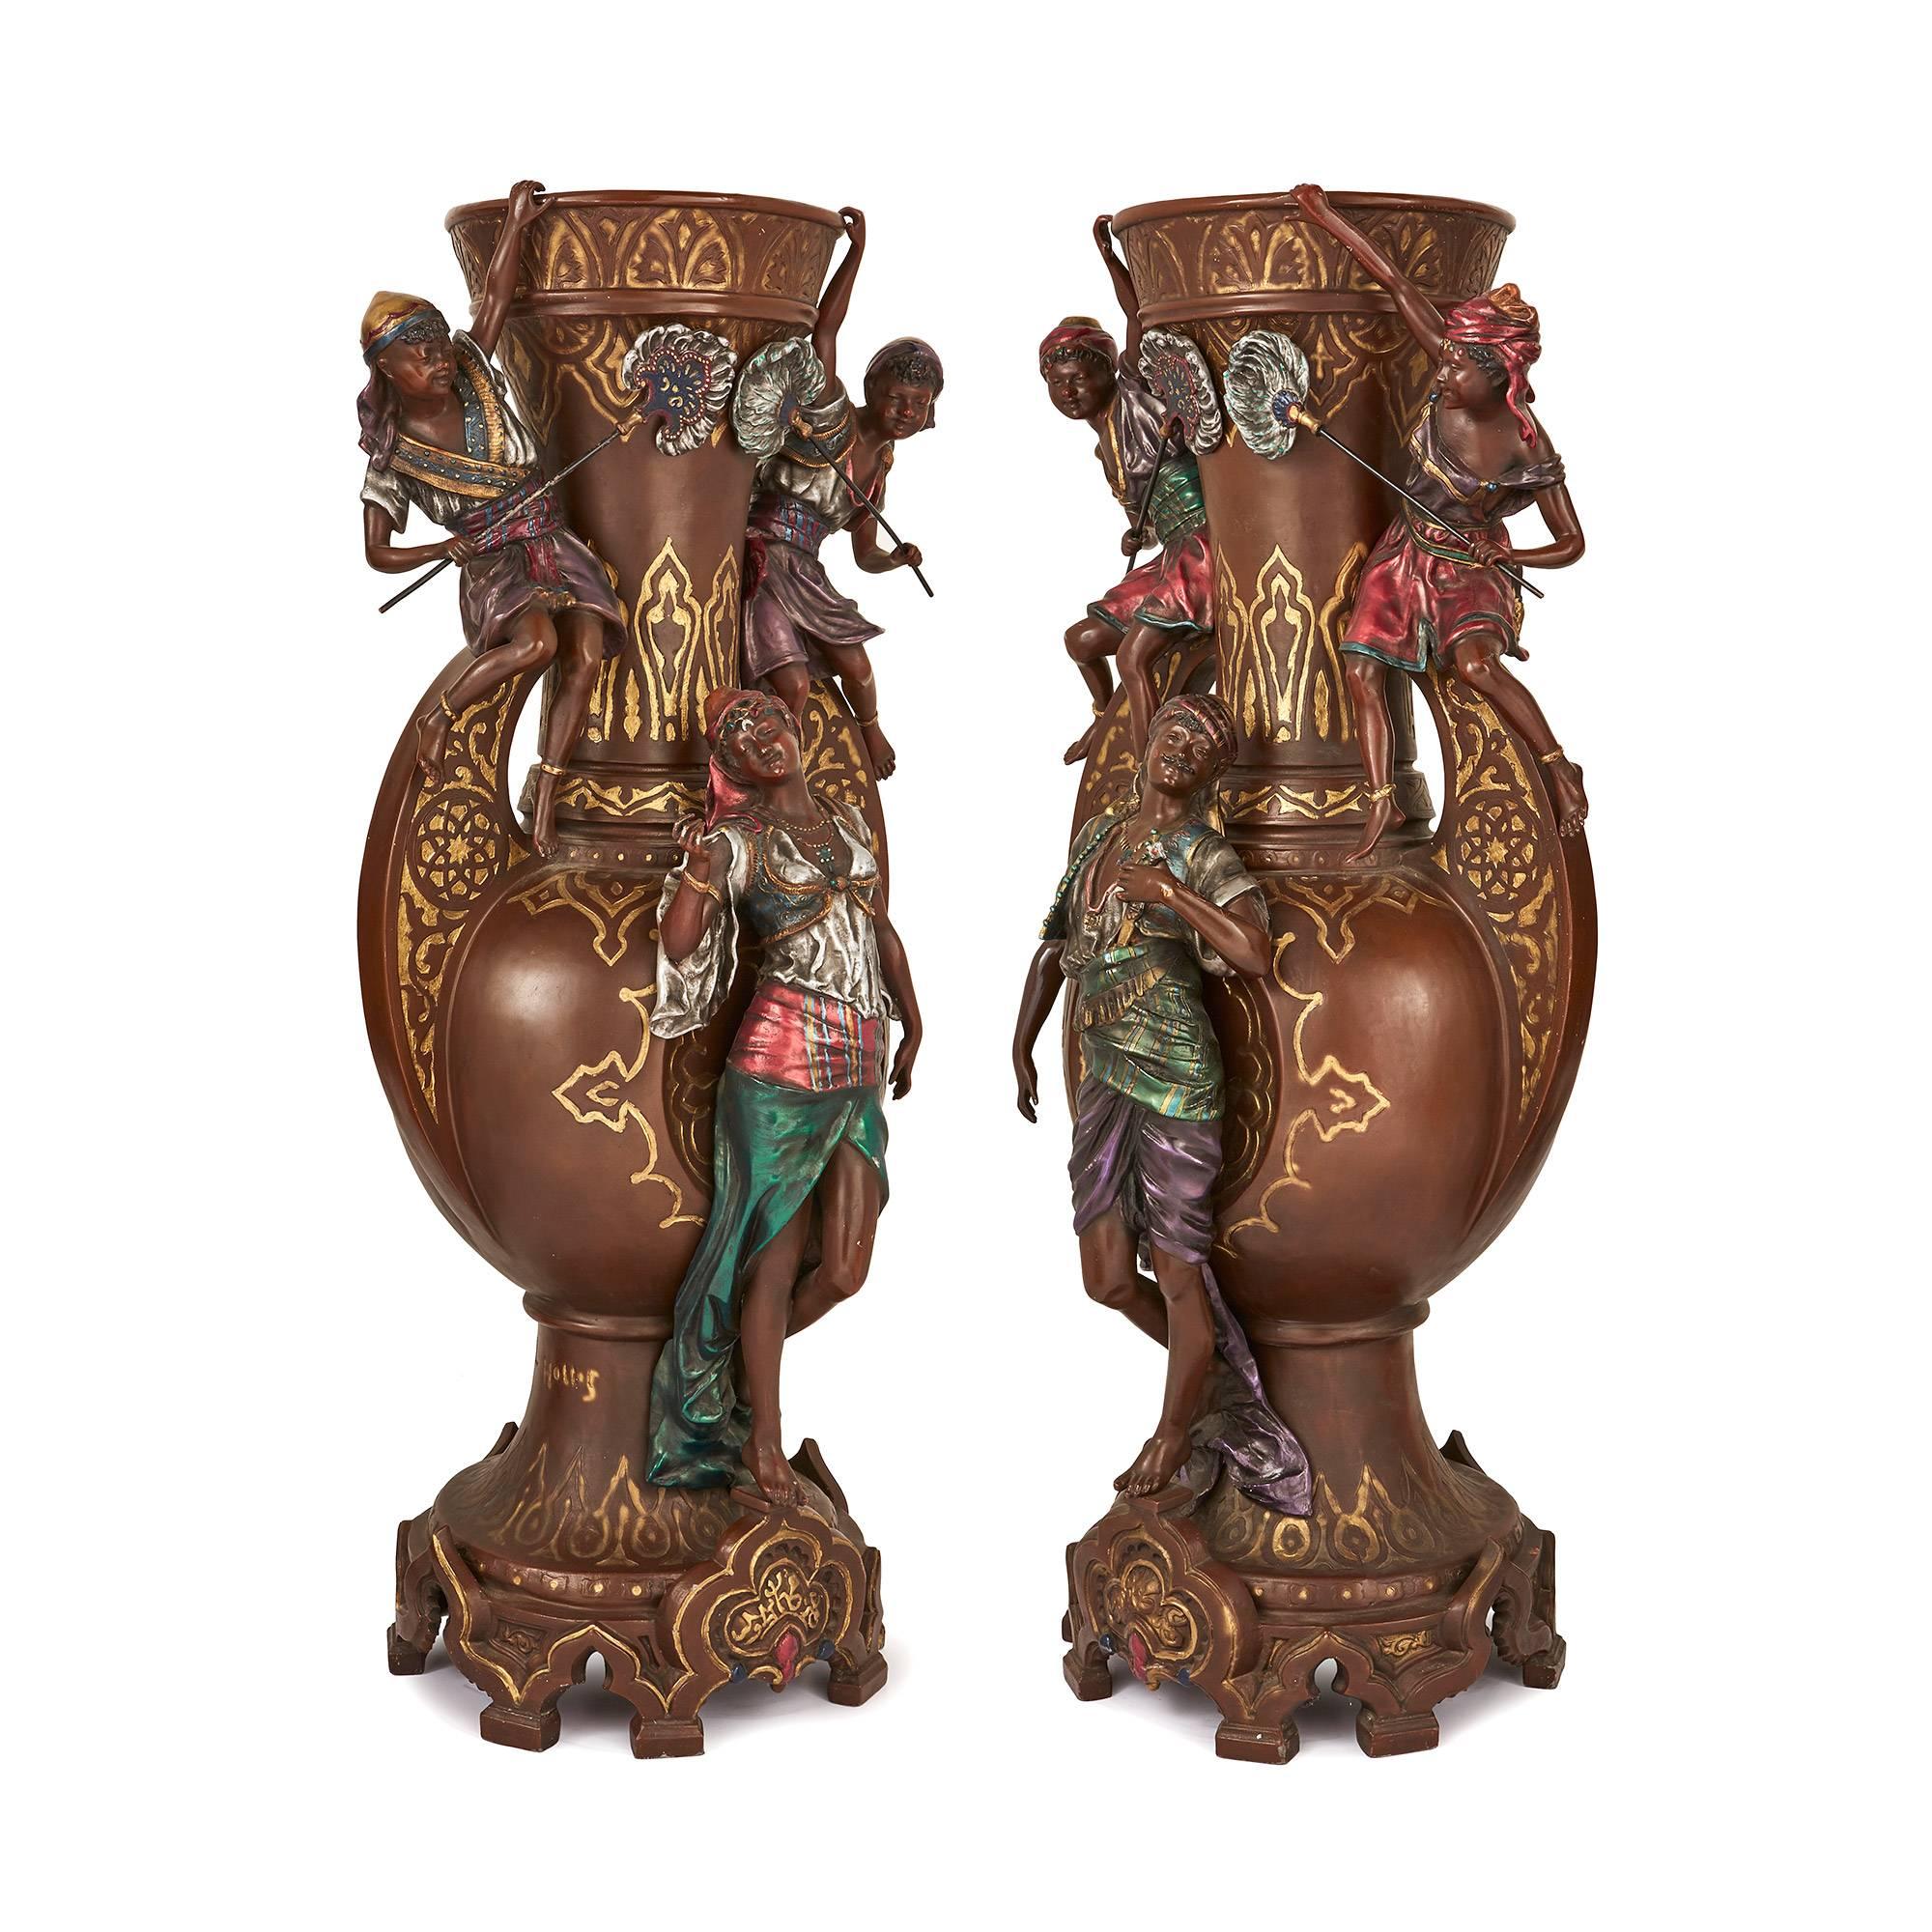 Each of a baluster form in a brown patina and cold painted in polychrome, with an oriental figure in exotic dress, fanned by two servants perched upon the handles on either side with one hand hanging on to the rim, decorated with Islamic-inspired